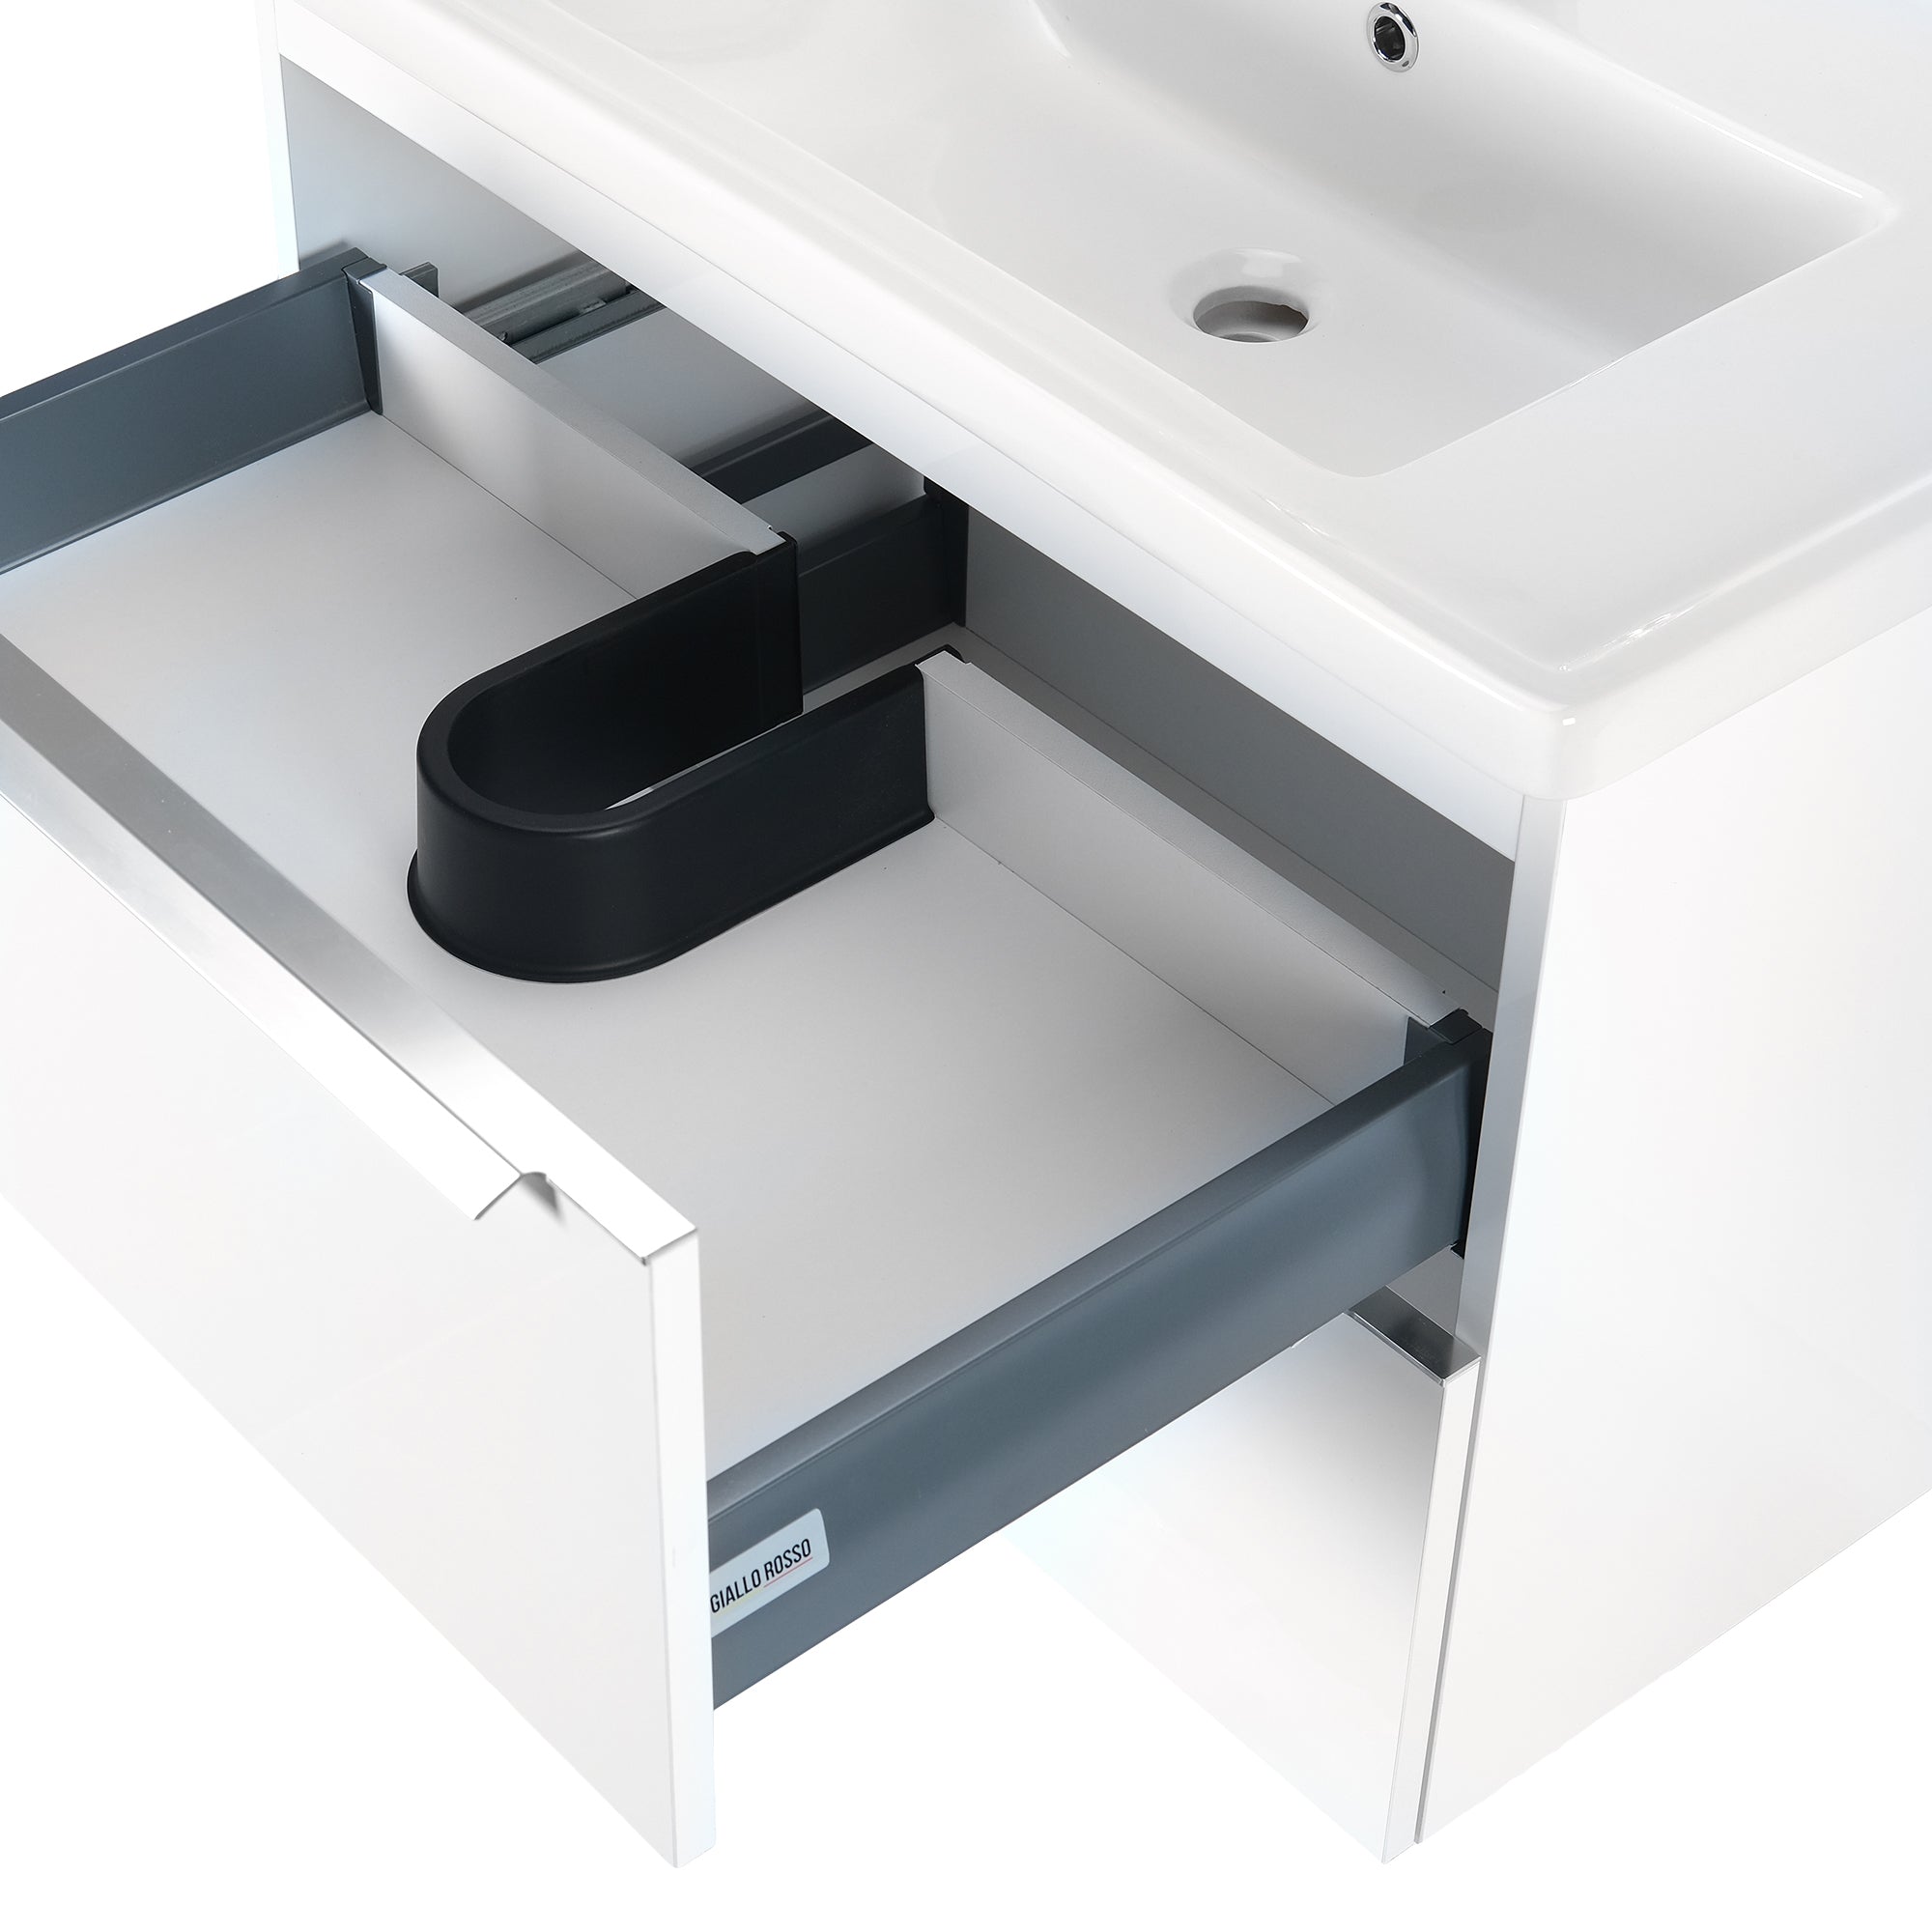 ARGENTO 32 INCH MODERN WALL MOUNT VANITY AND SINK COMBO - GLOSSY WHITE